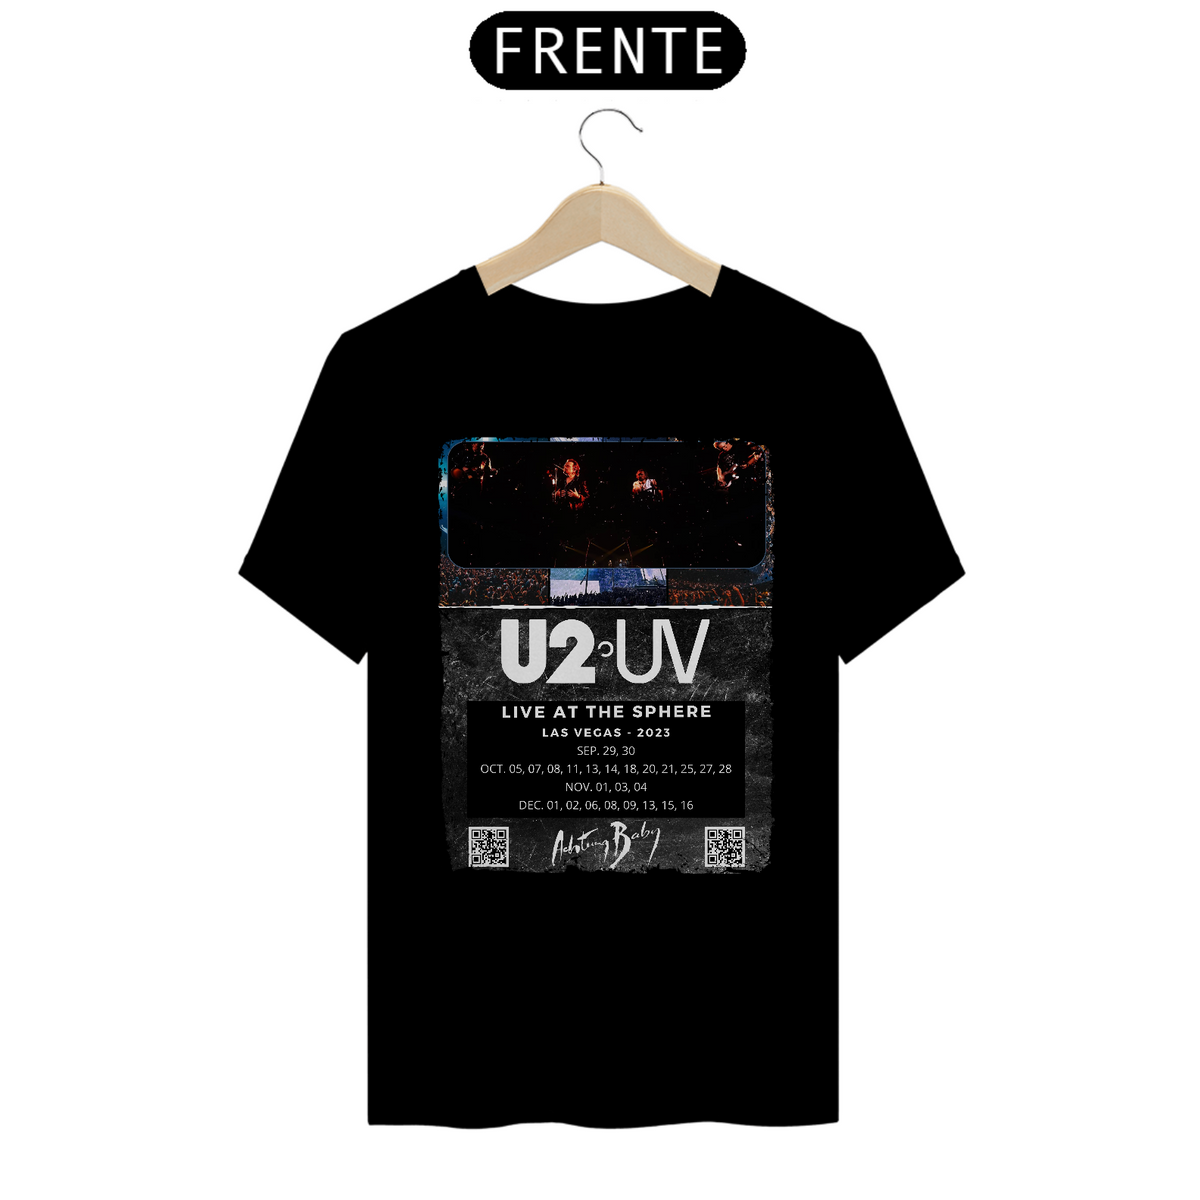 Nome do produto: T-SHIRT CLASSIC U2 - ACHTUNG BABY LIVE AT SPHERE 2023